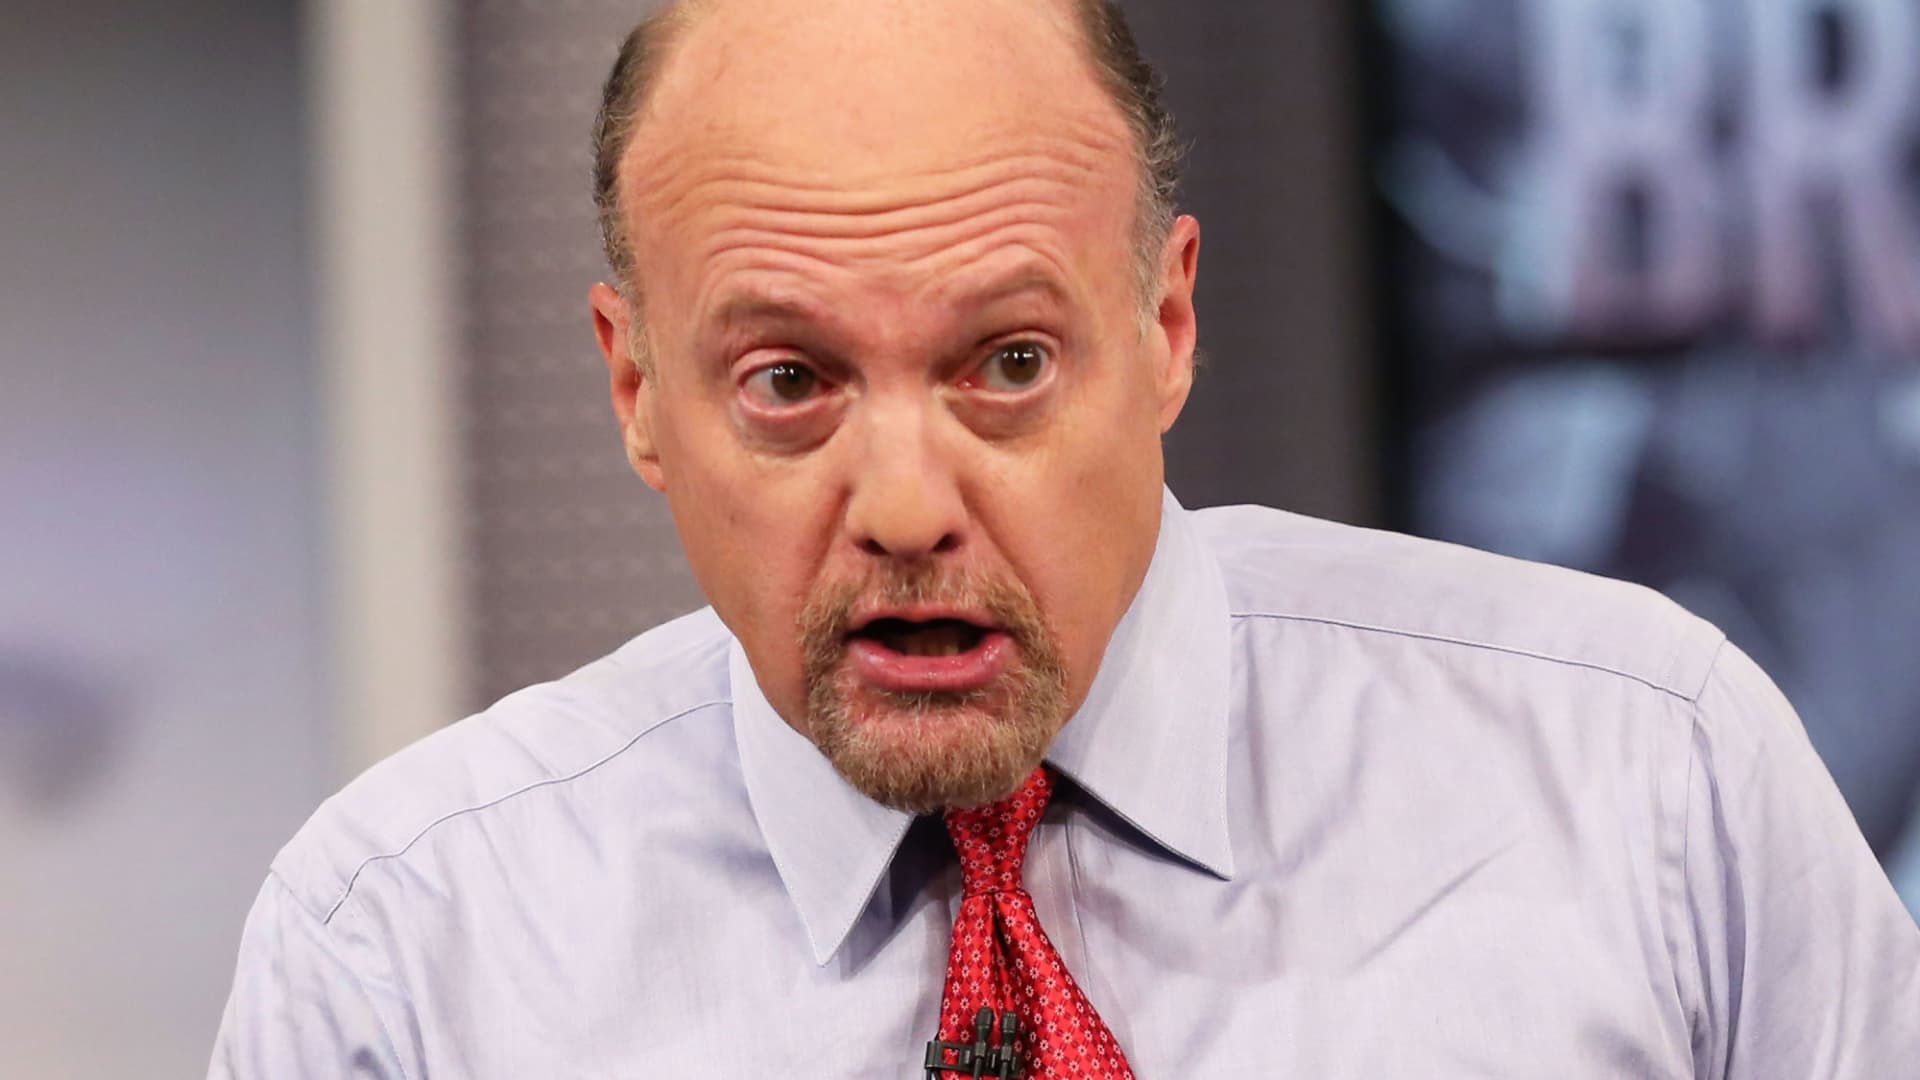 Jim Cramer discusses 10 stocks that led the S&P 500 in the second quarter